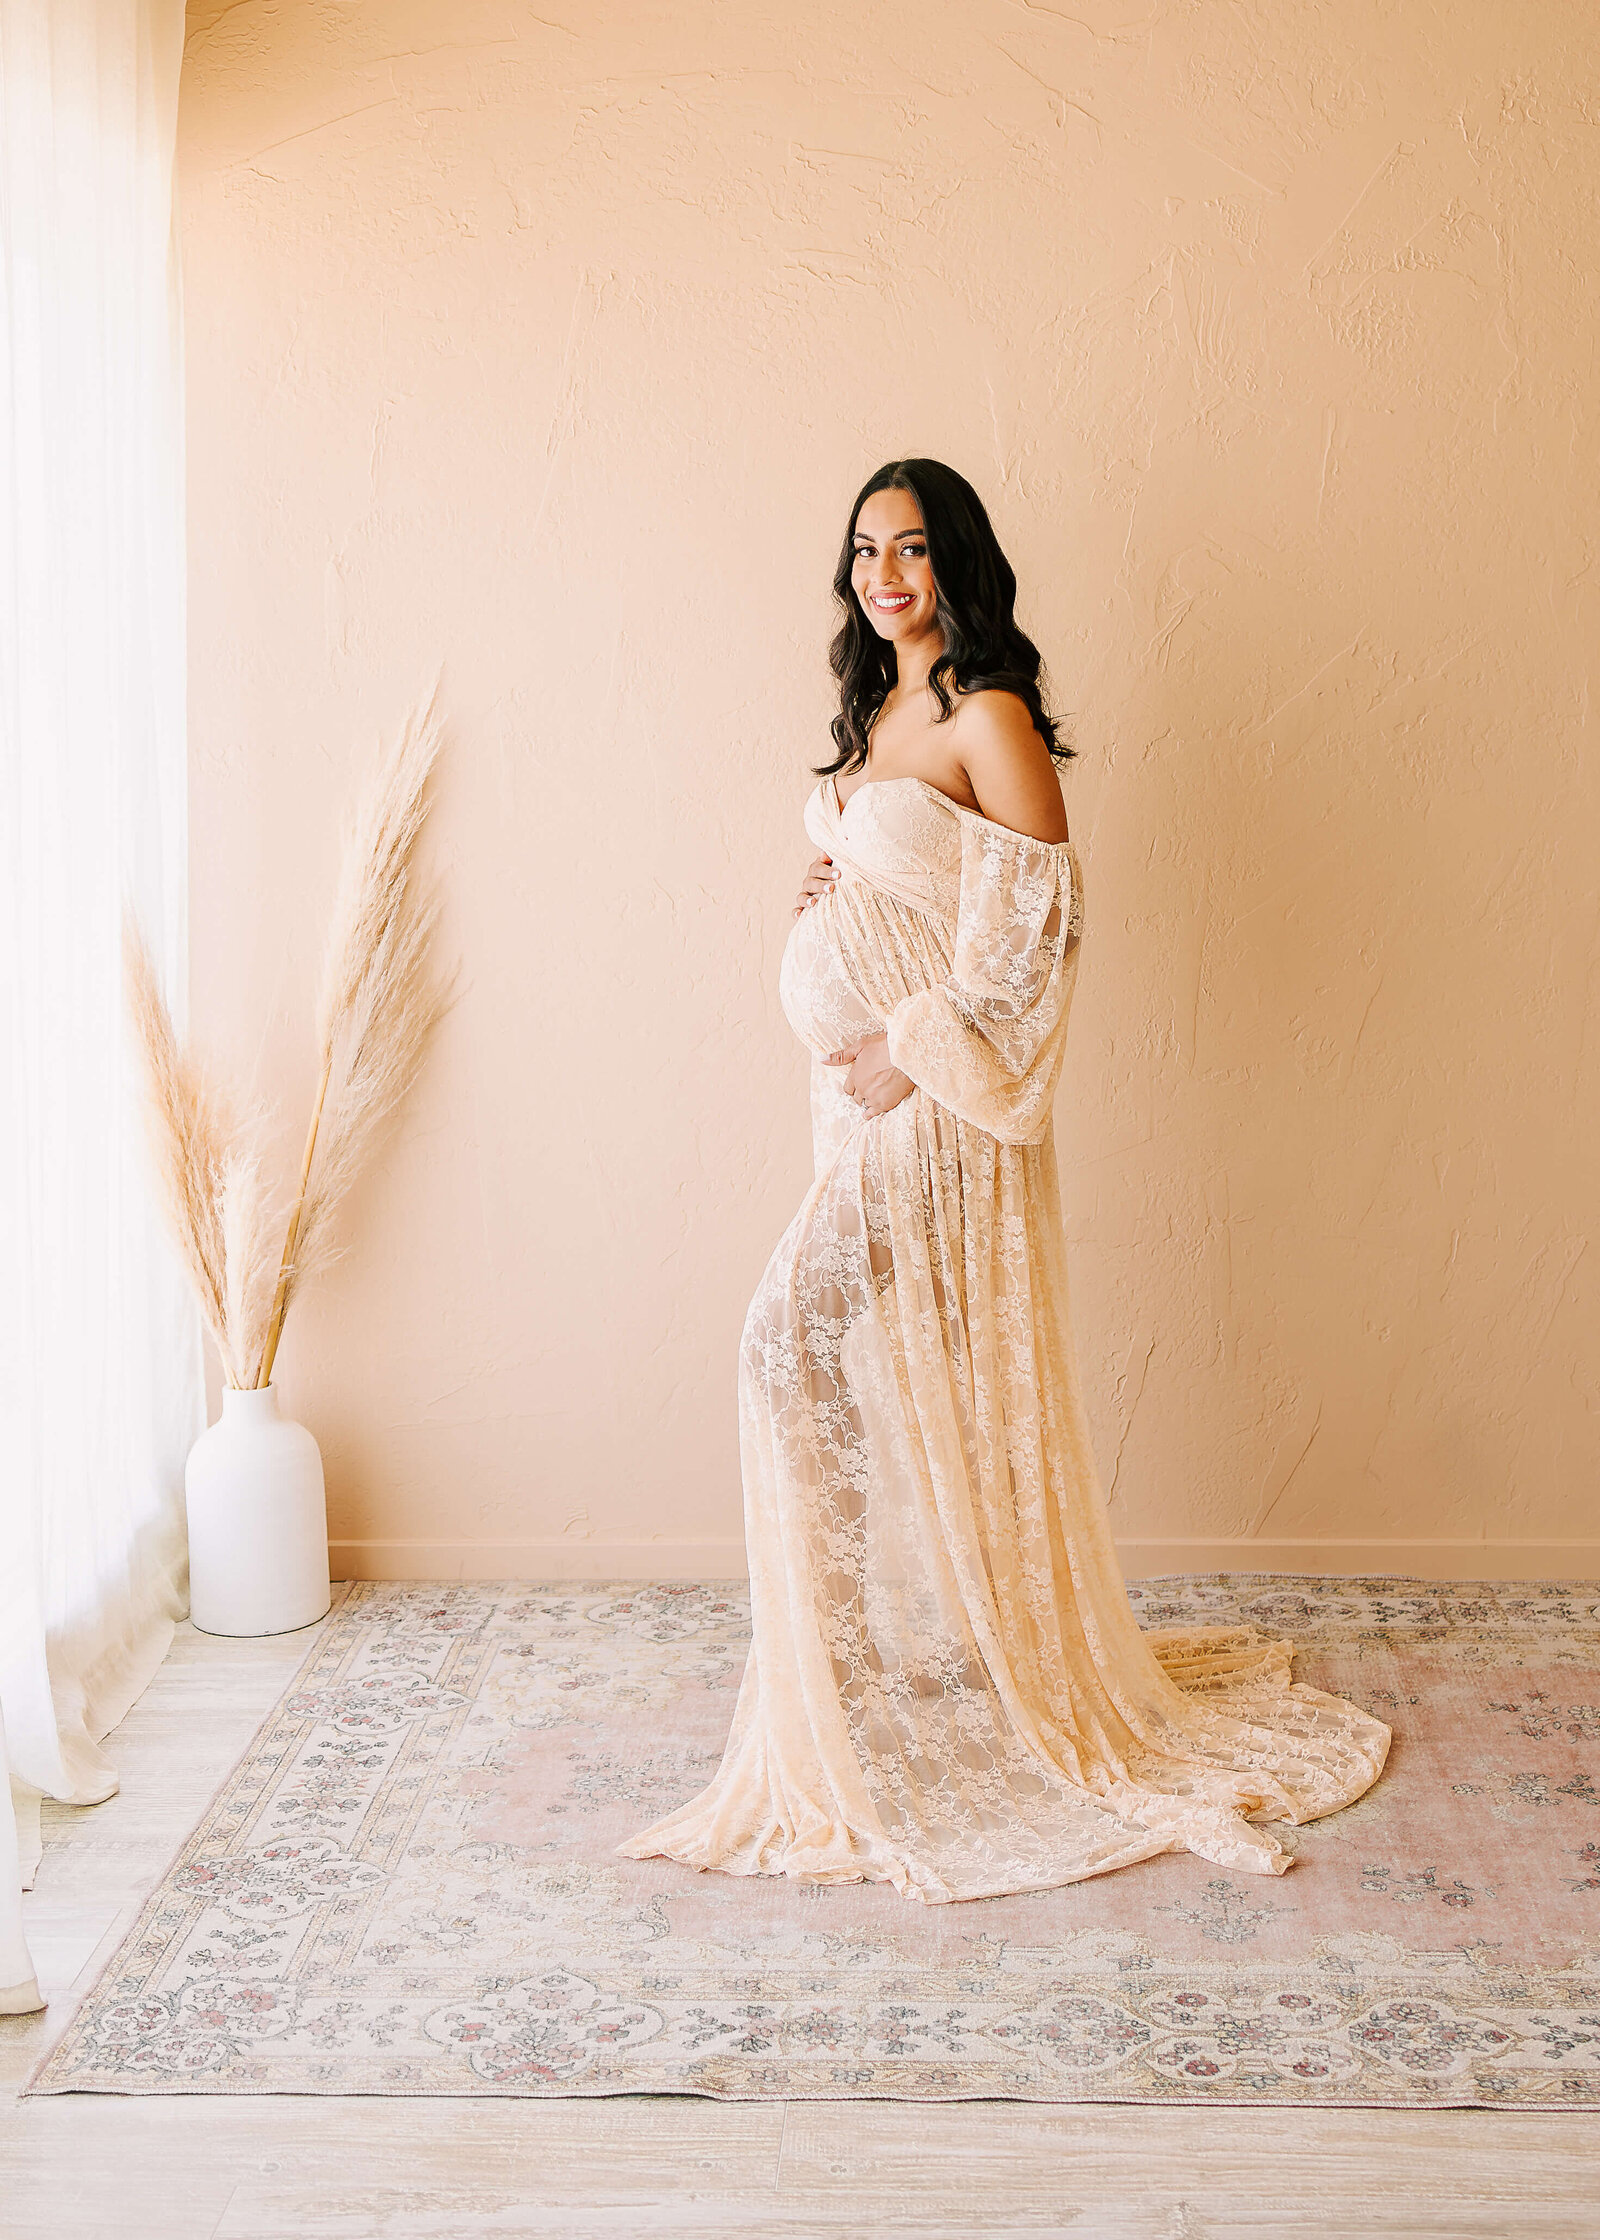 Expectant mom posed in boho studio in Huntington Beach wearing lace gown by Ashley Nicole Photography.